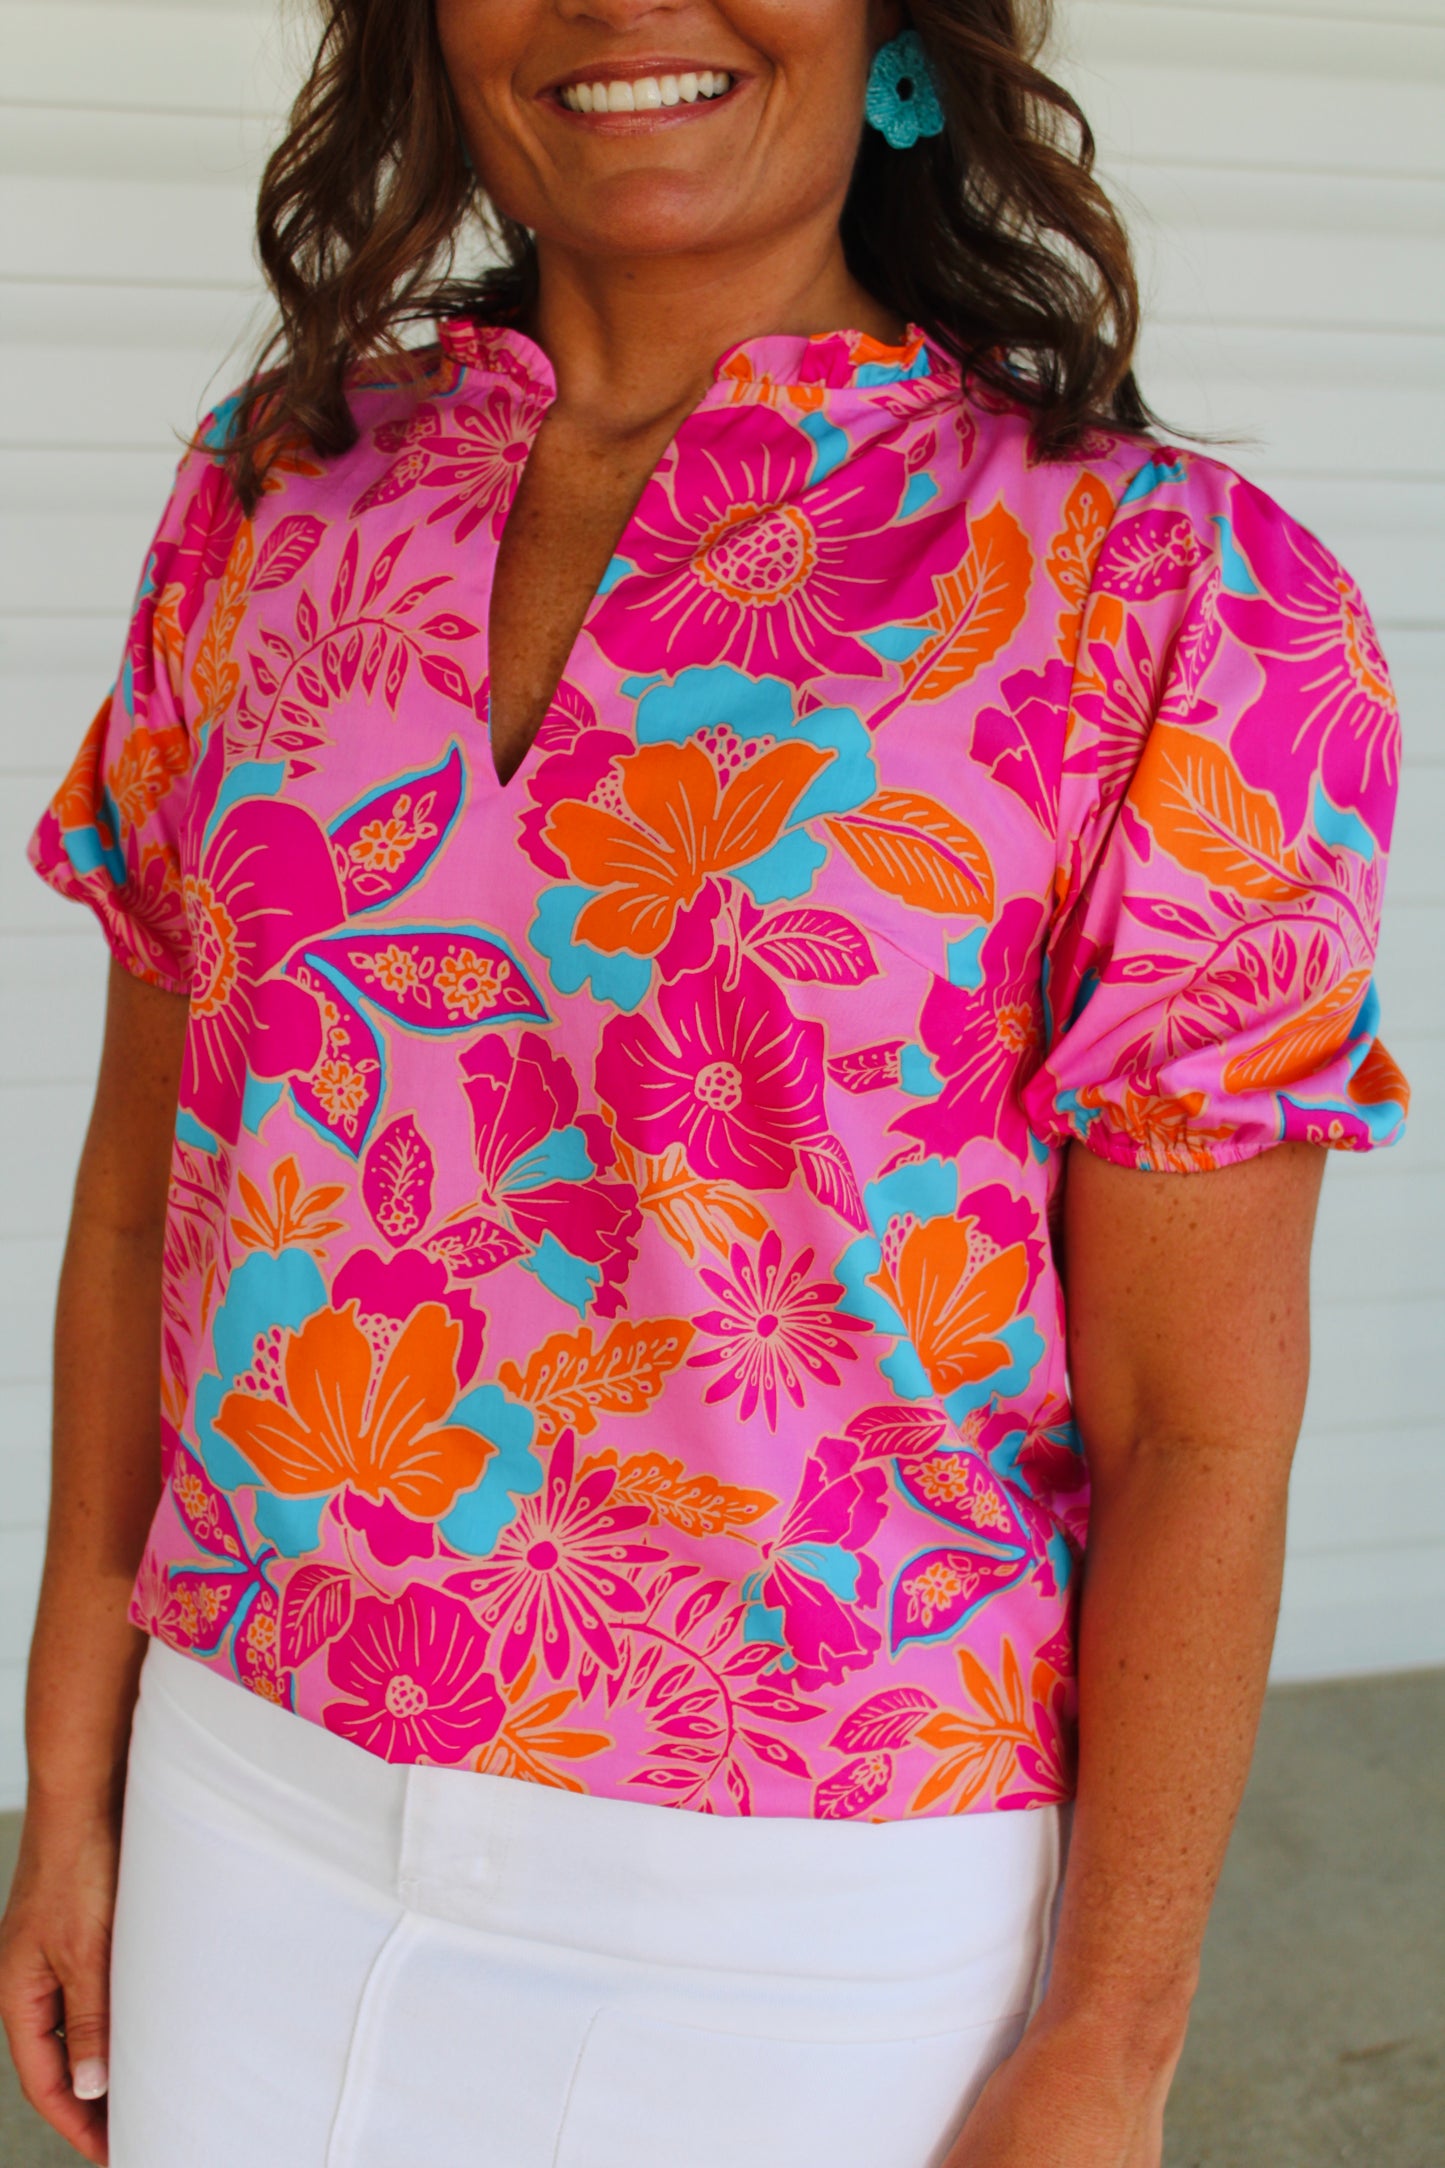 The Wren Pink Floral Print Top